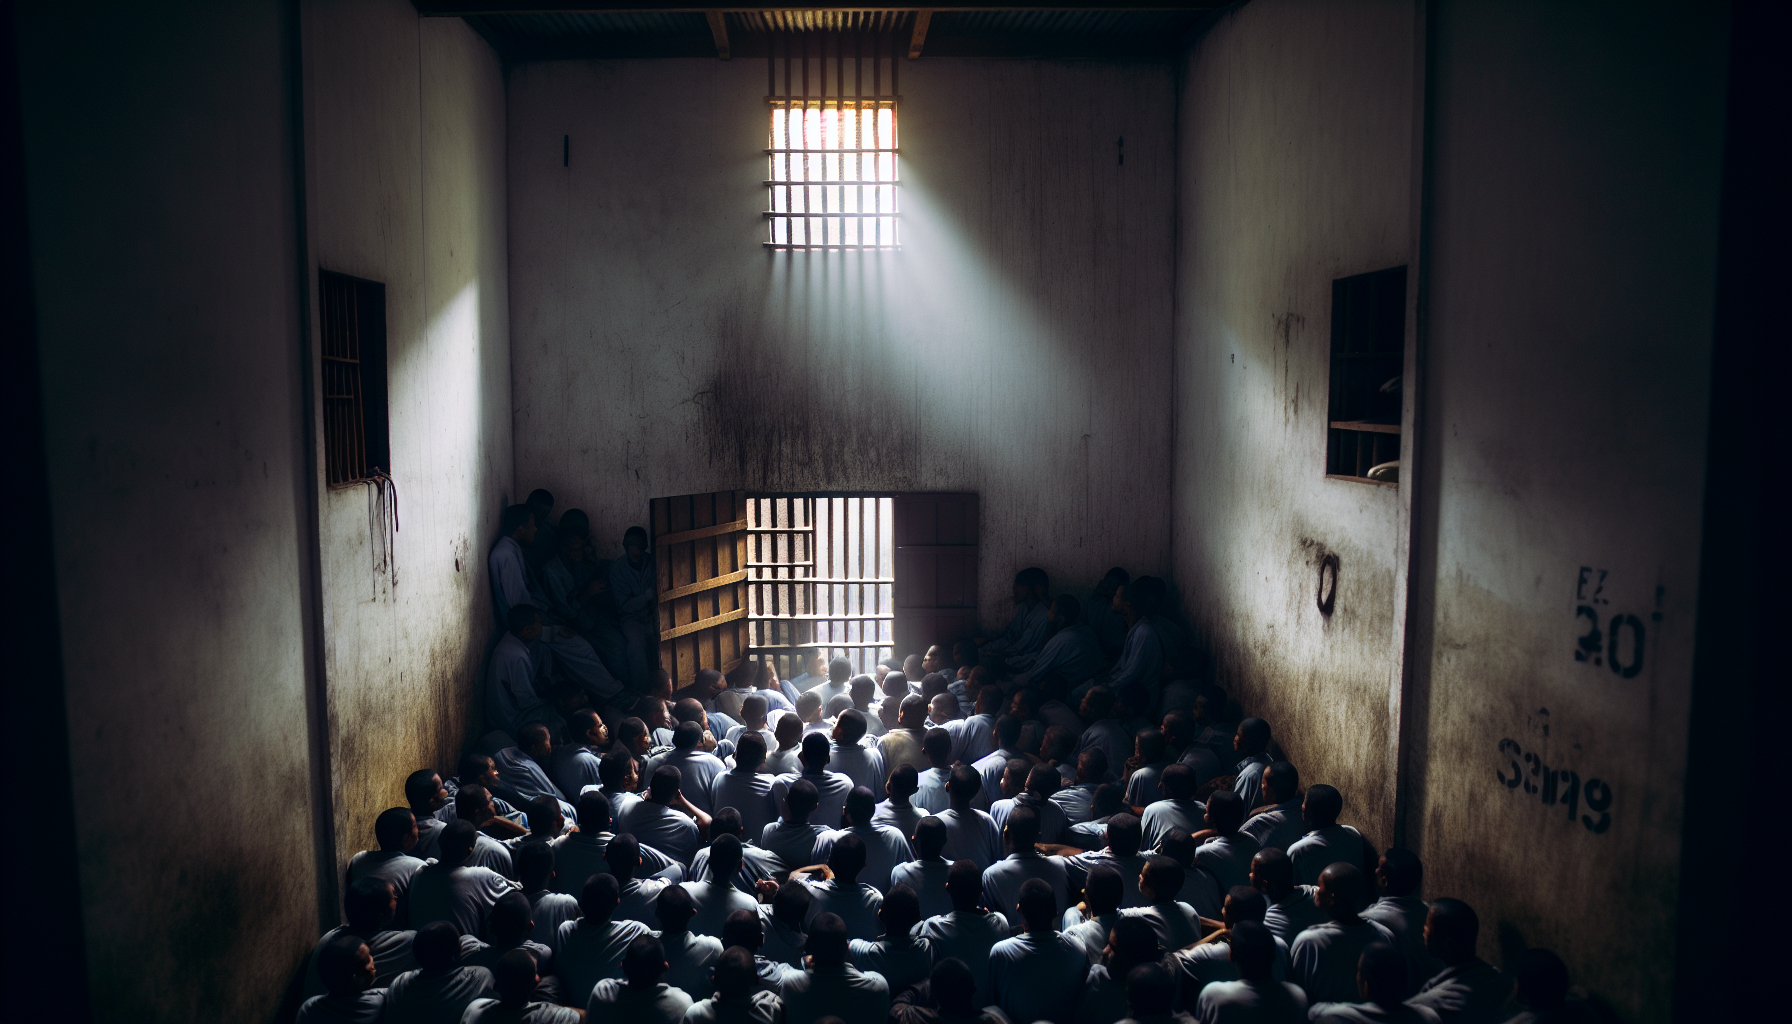 Overcrowded prison cell in Costa Rica